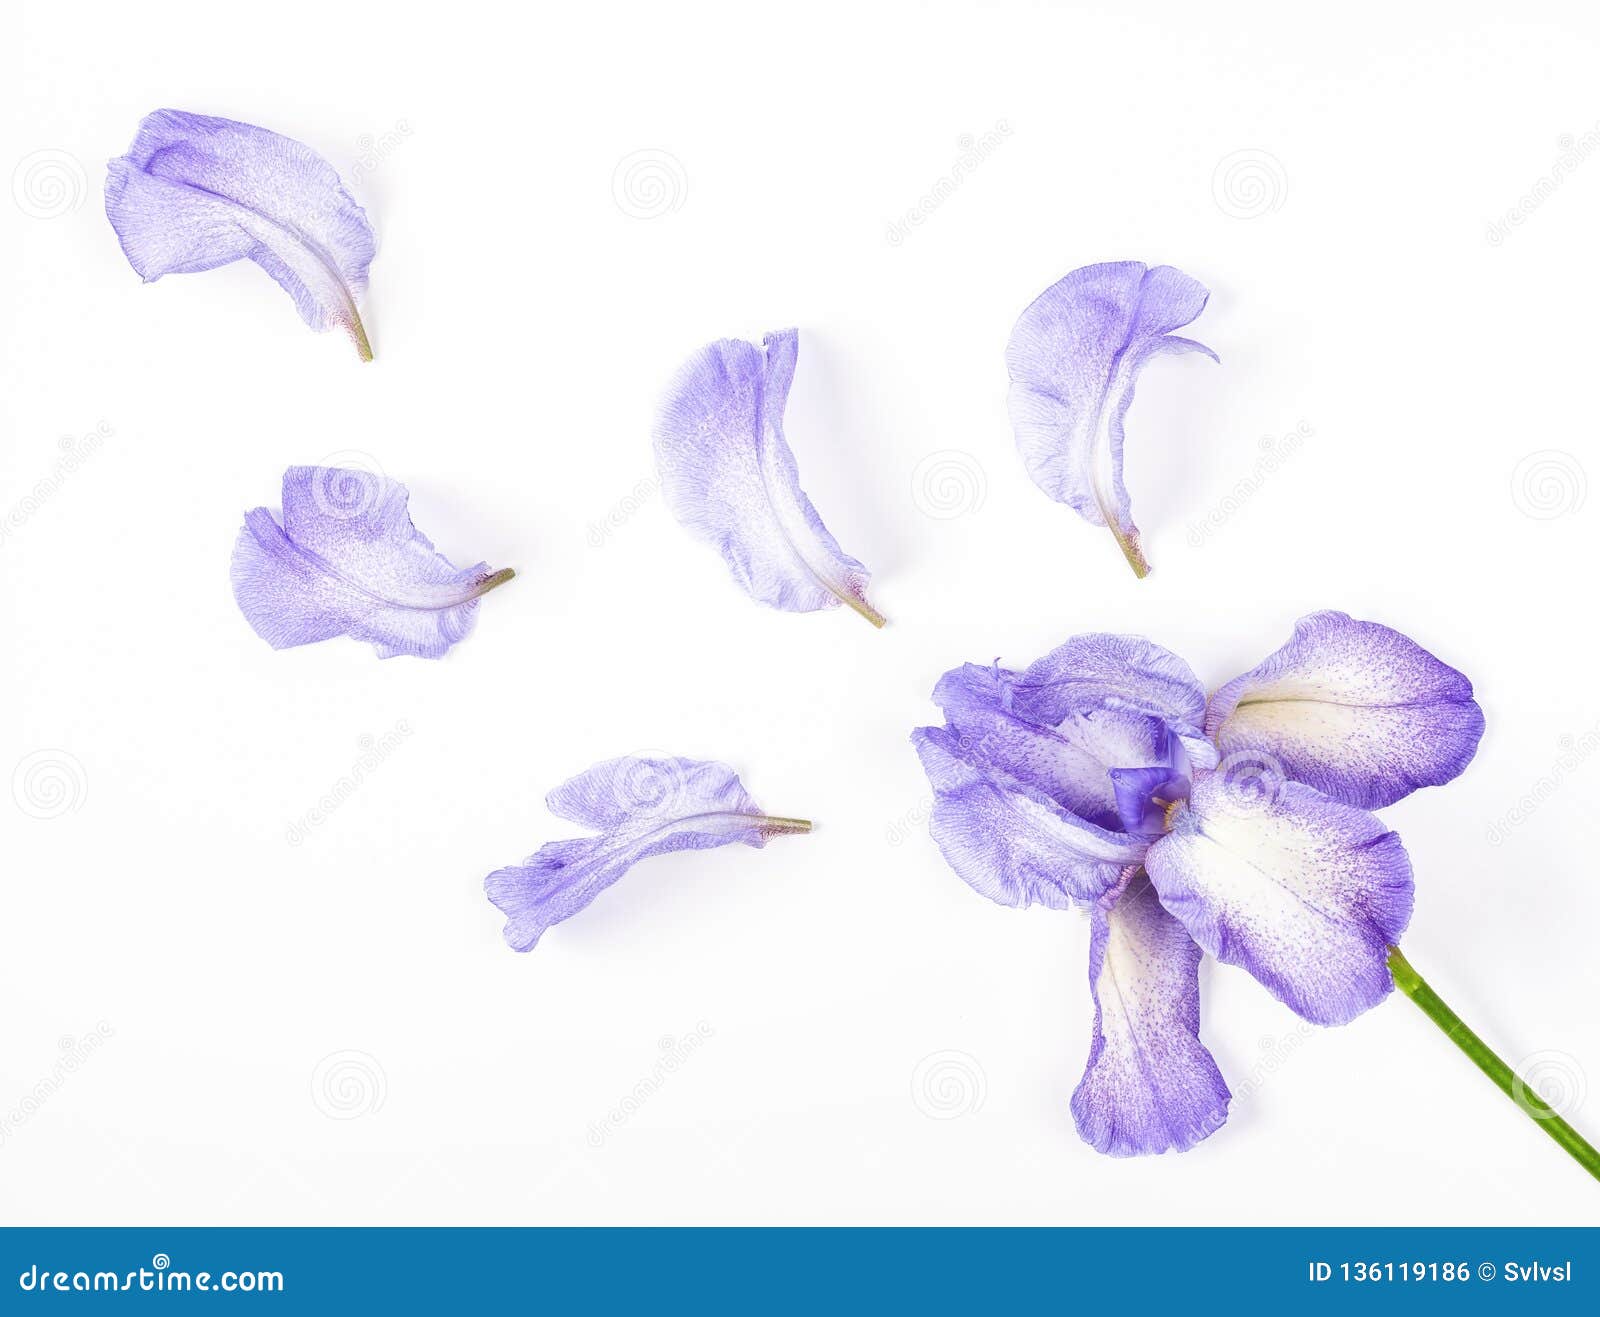 Purple Iris Flower and Petals on White Background. Flat Lay Stock ...